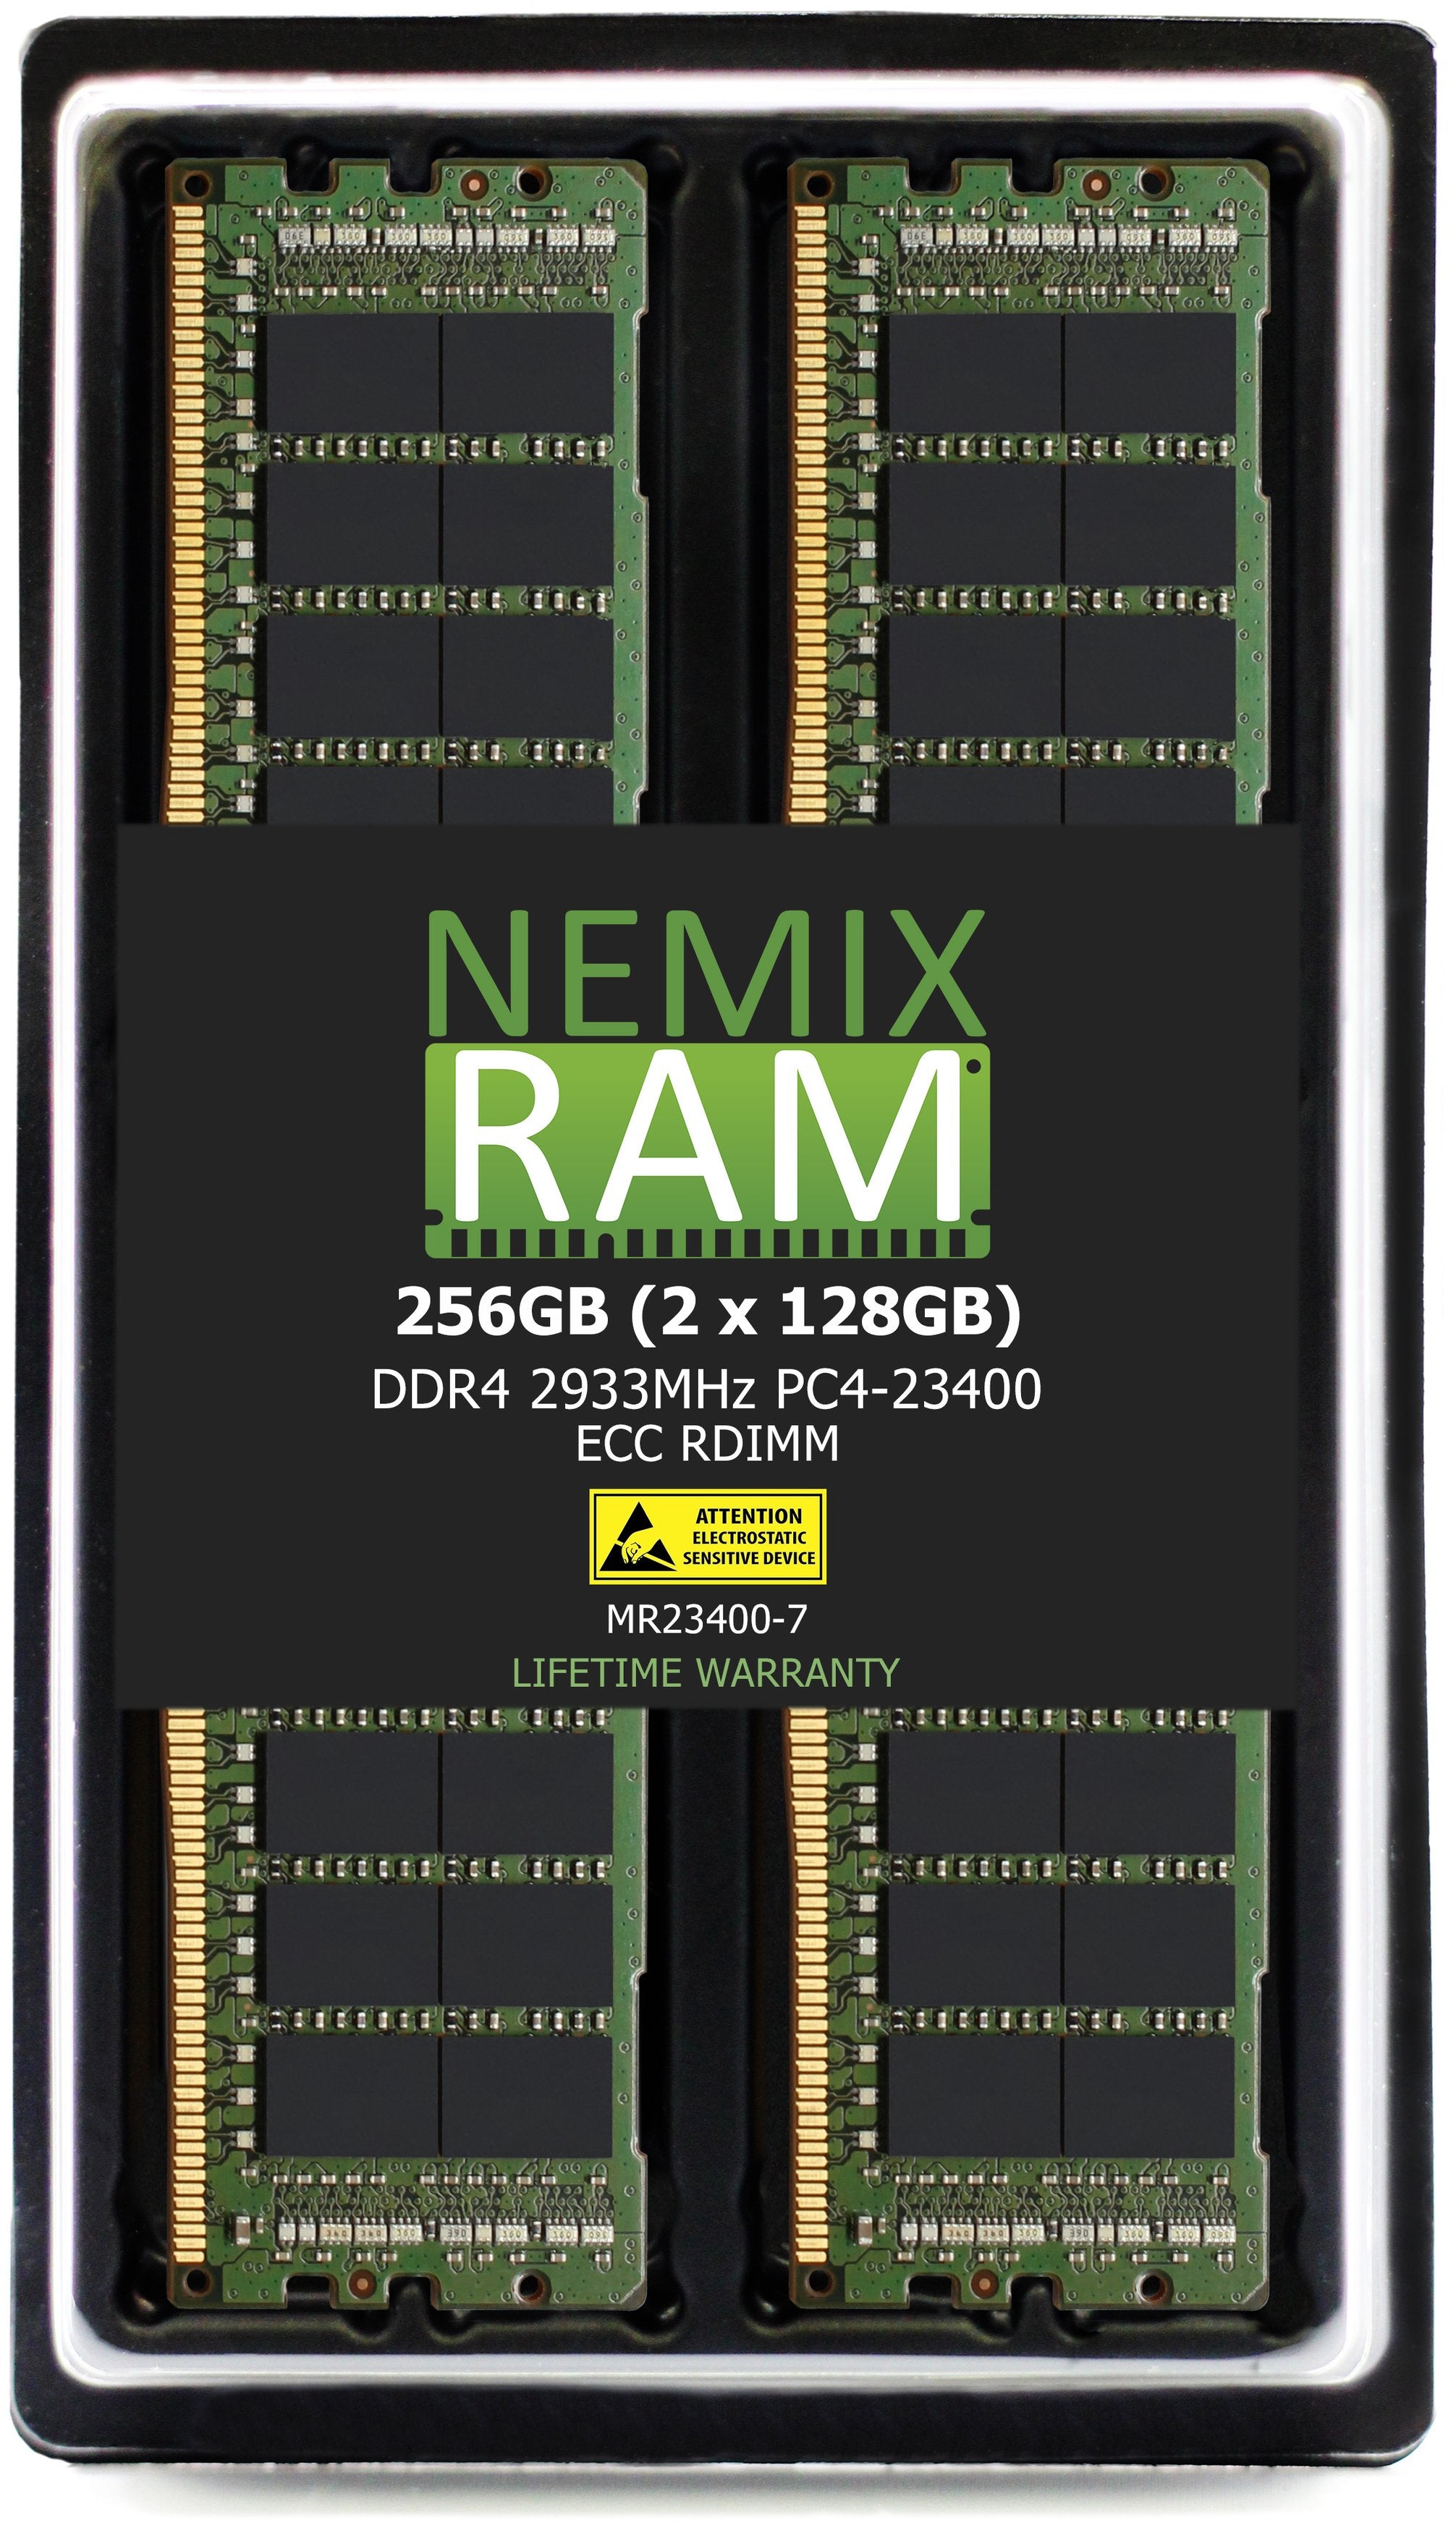 DDR4 2933MHZ PC4-23400 RDIMM 2S2RX4